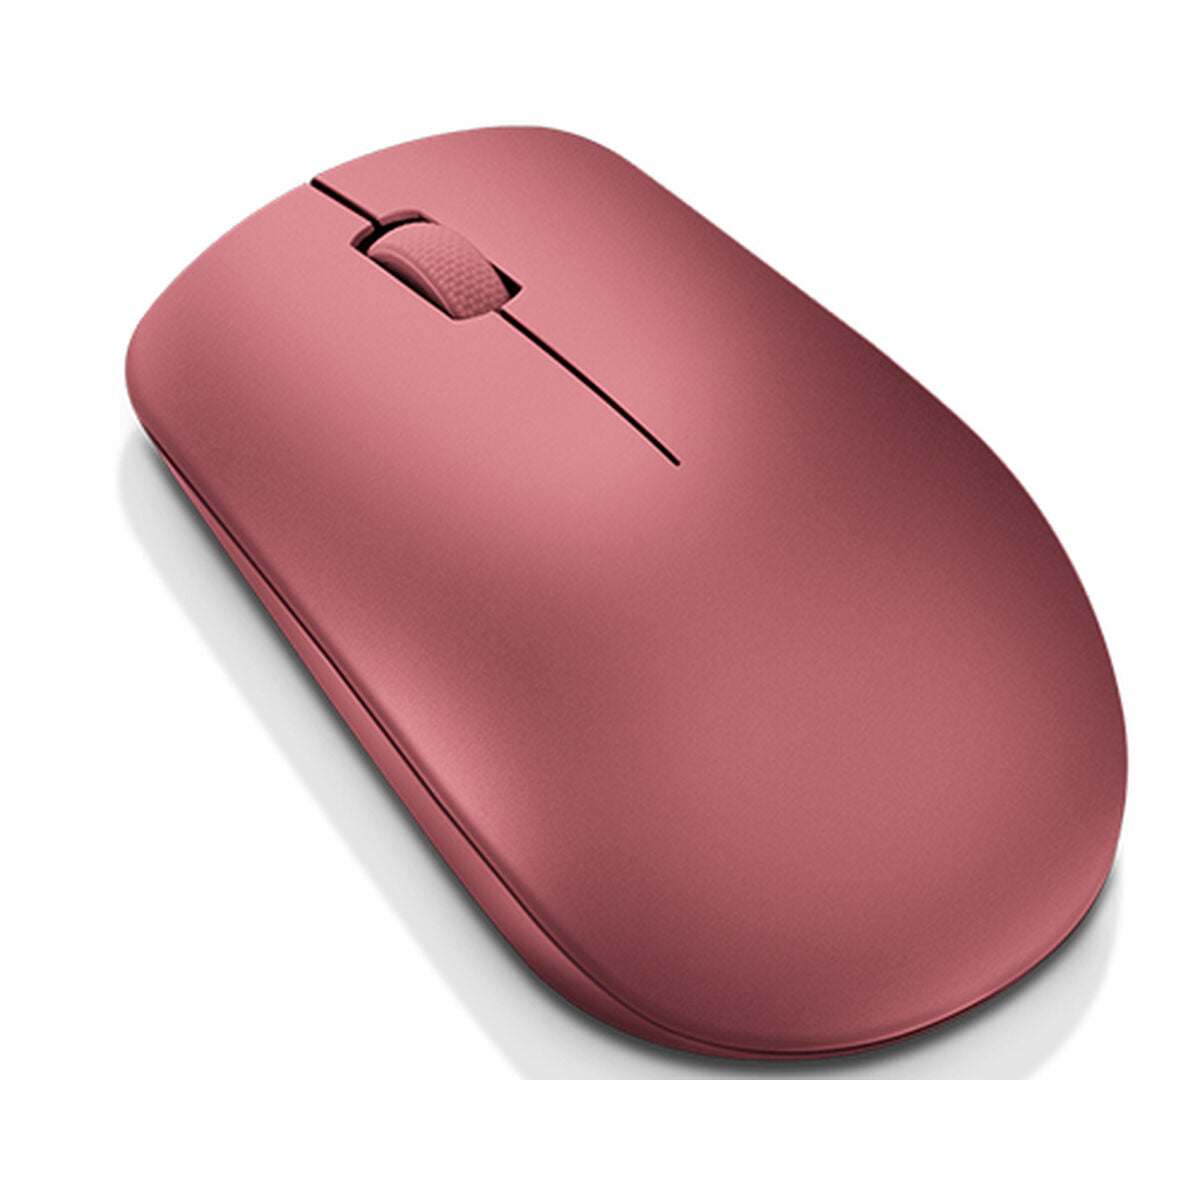 Wireless Mouse Lenovo GY50Z18990 Red, Lenovo, Computing, Accessories, wireless-mouse-lenovo-gy50z18990-red, Brand_Lenovo, category-reference-2609, category-reference-2642, category-reference-2656, category-reference-t-19685, category-reference-t-19908, category-reference-t-21353, computers / peripherals, Condition_NEW, office, Price_20 - 50, Teleworking, RiotNook